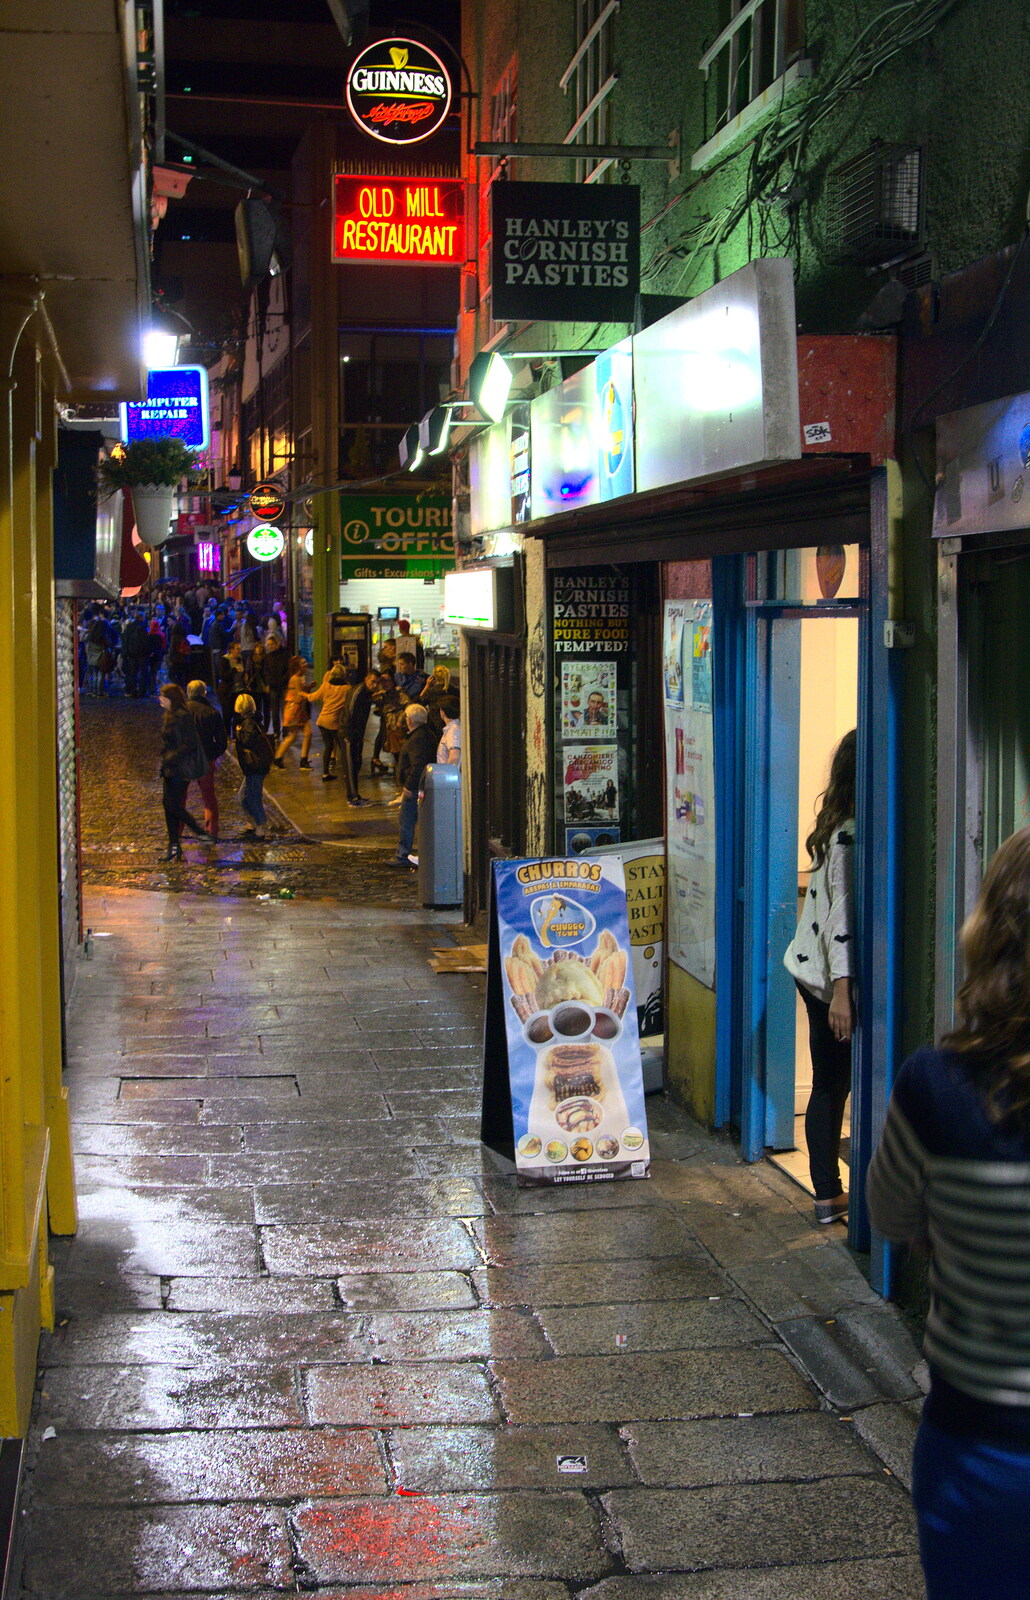 A damp side street in Temple Bar from A Night Out in Dublin, County Dublin, Ireland - 9th August 2014